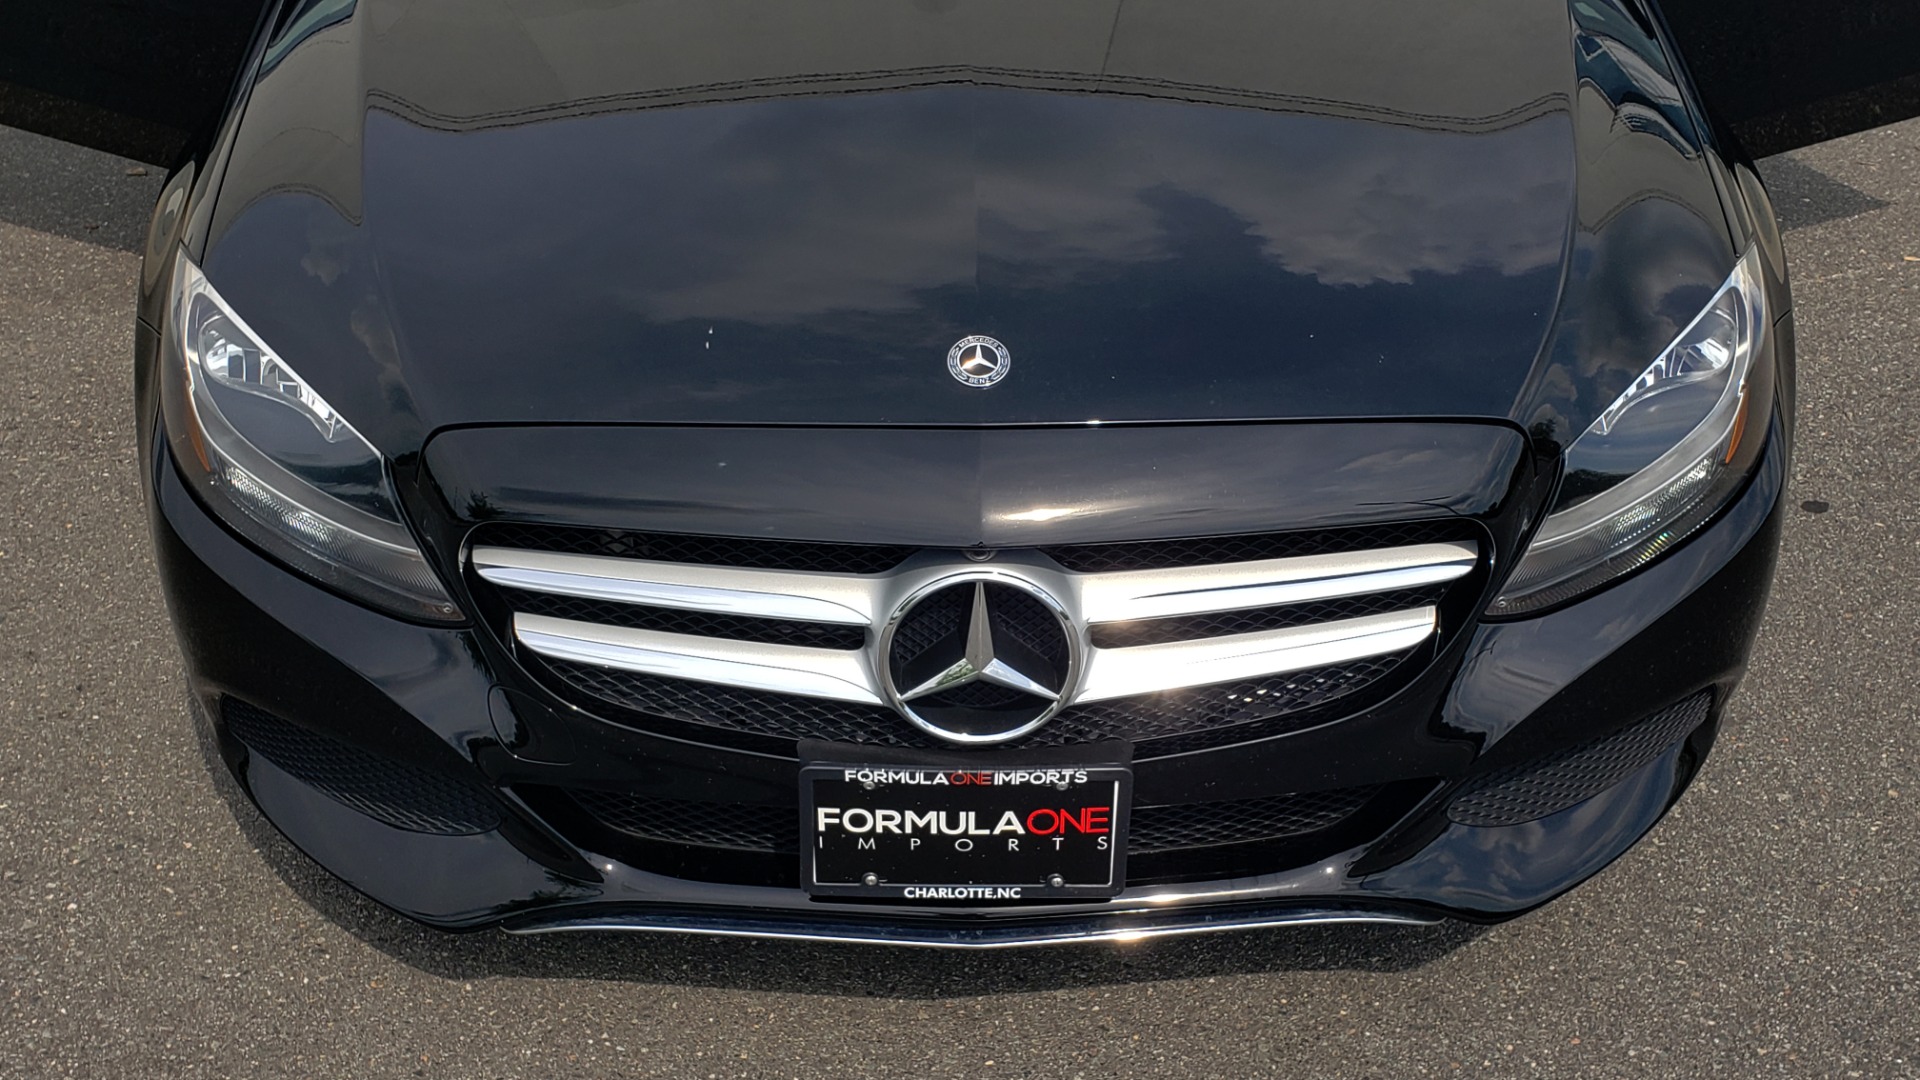 Used 2018 Mercedes-Benz C-CLASS C 300 PREMIUM / HTD STS / APPLE CARPLAY / 18IN WHEELS / REARVIEW for sale Sold at Formula Imports in Charlotte NC 28227 25